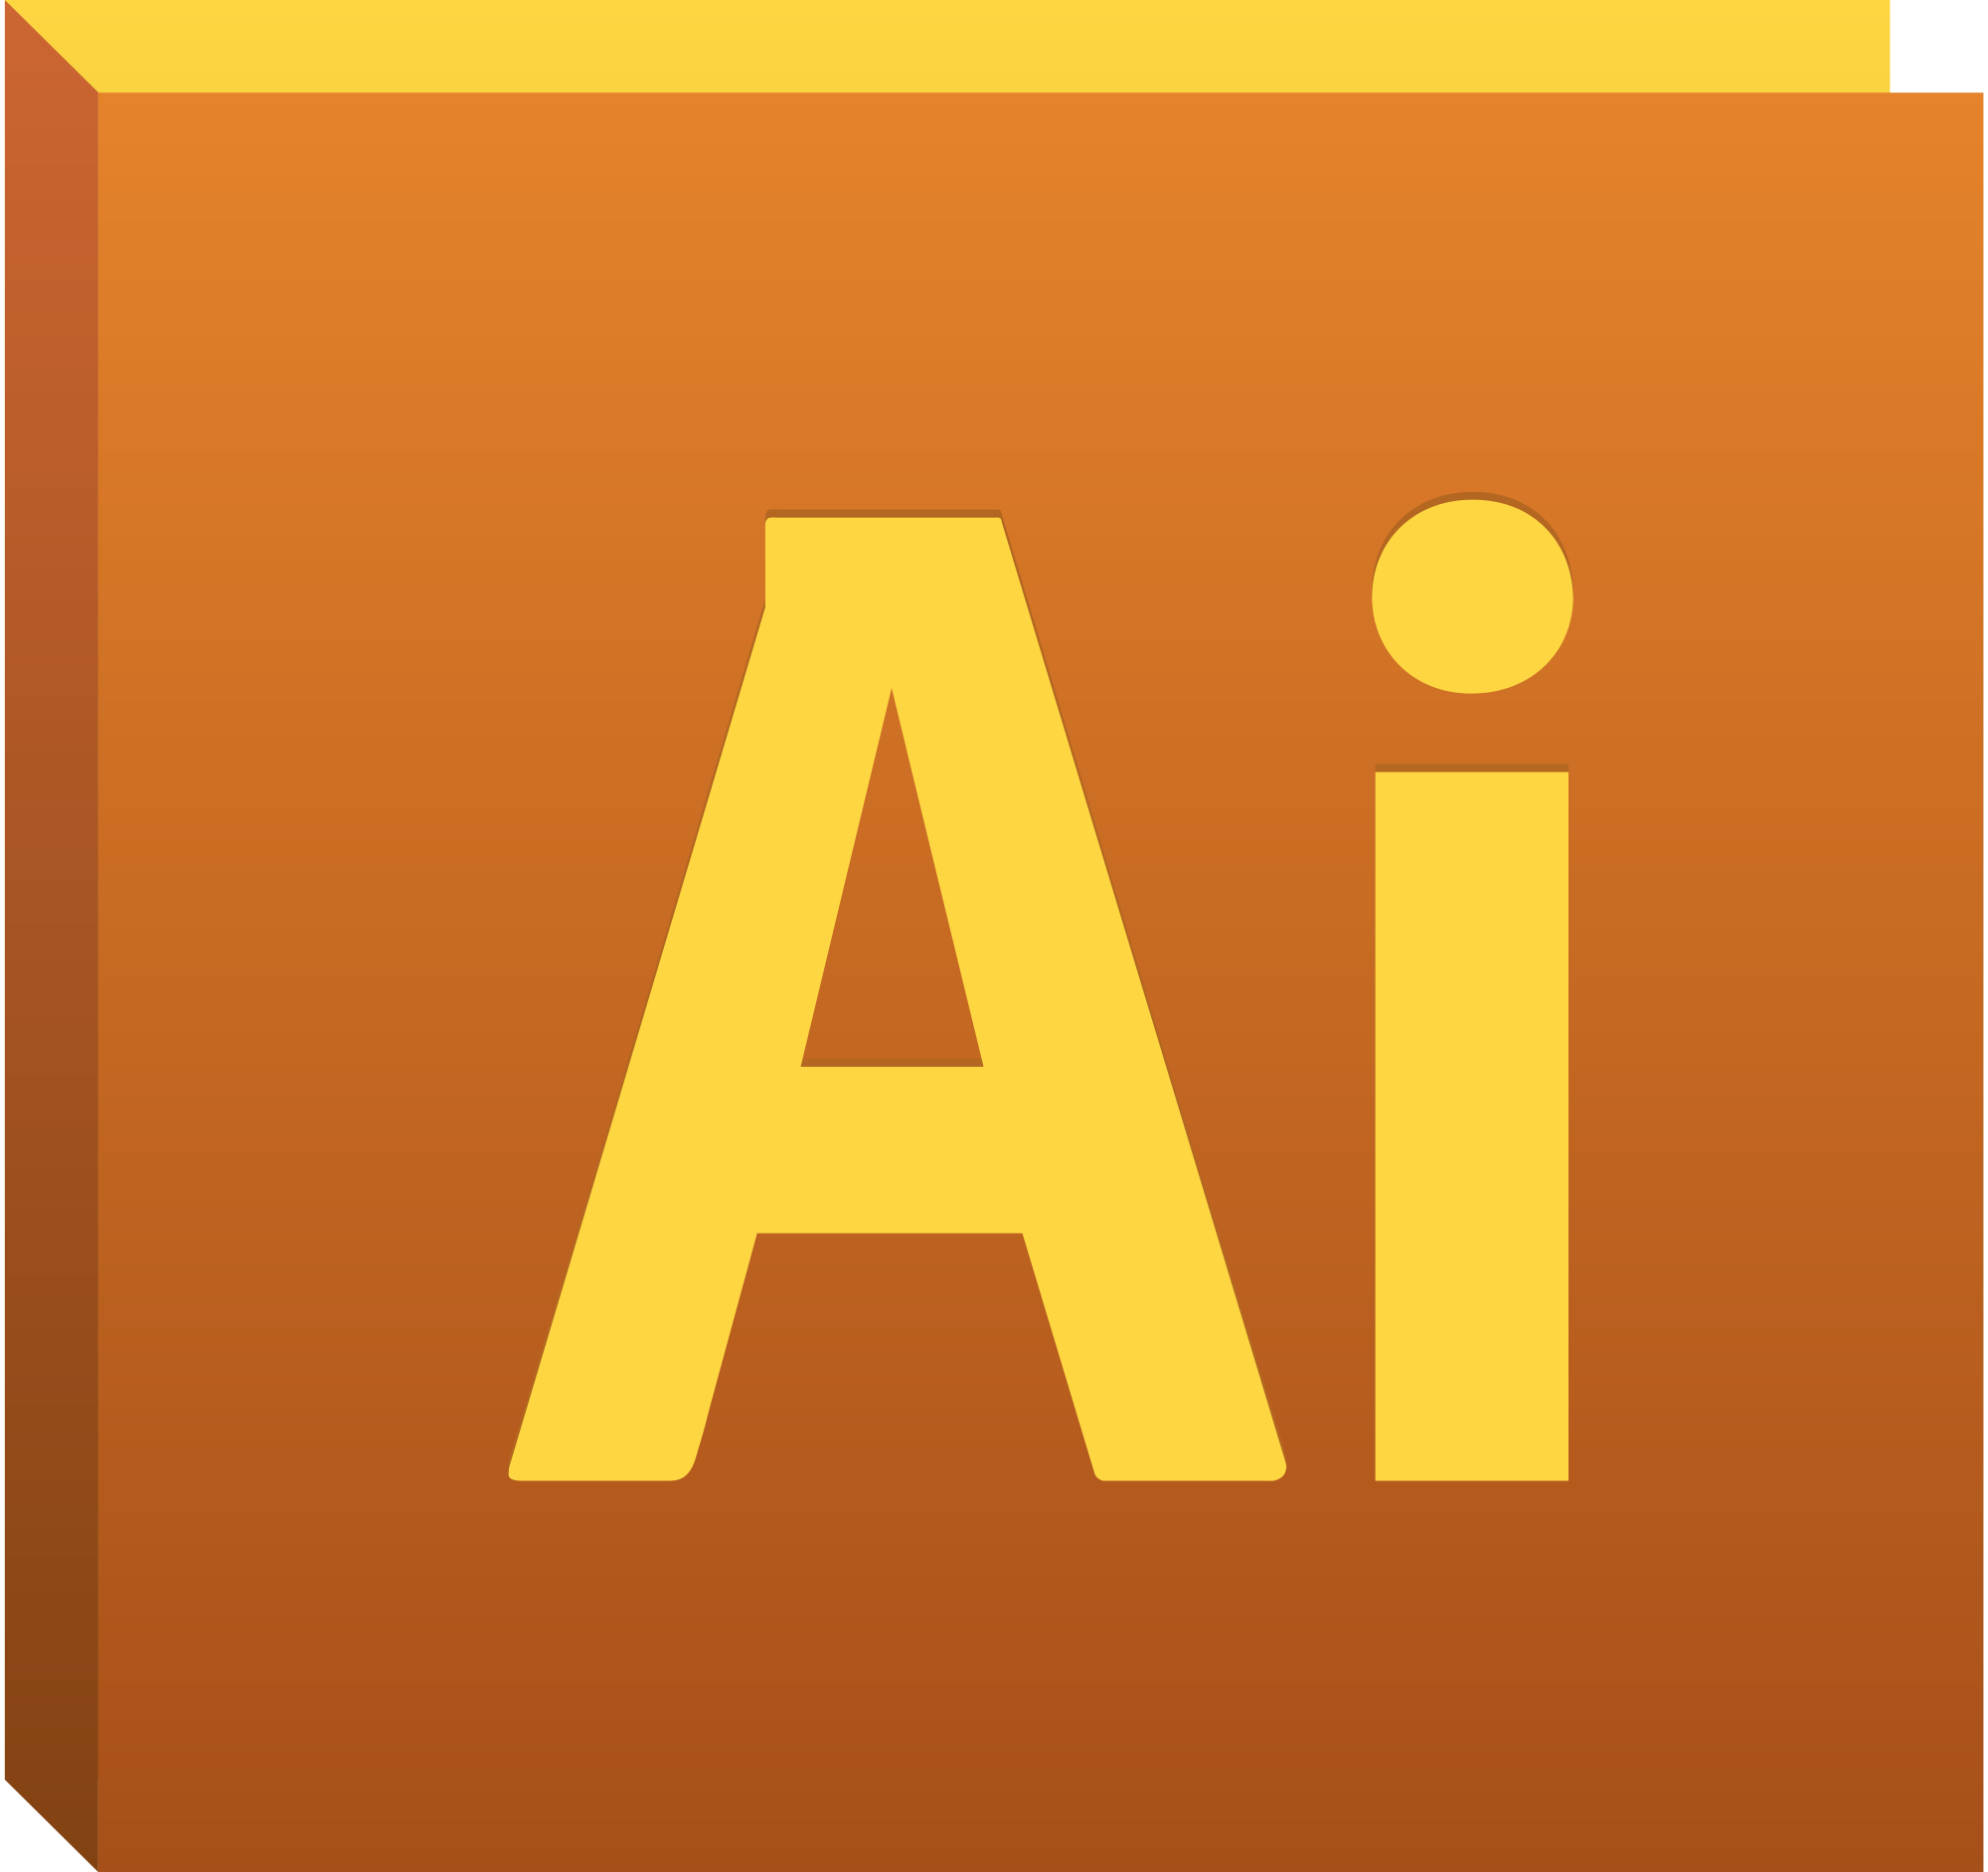 All Adobe CC 2015 Updates: The Direct Download Links for